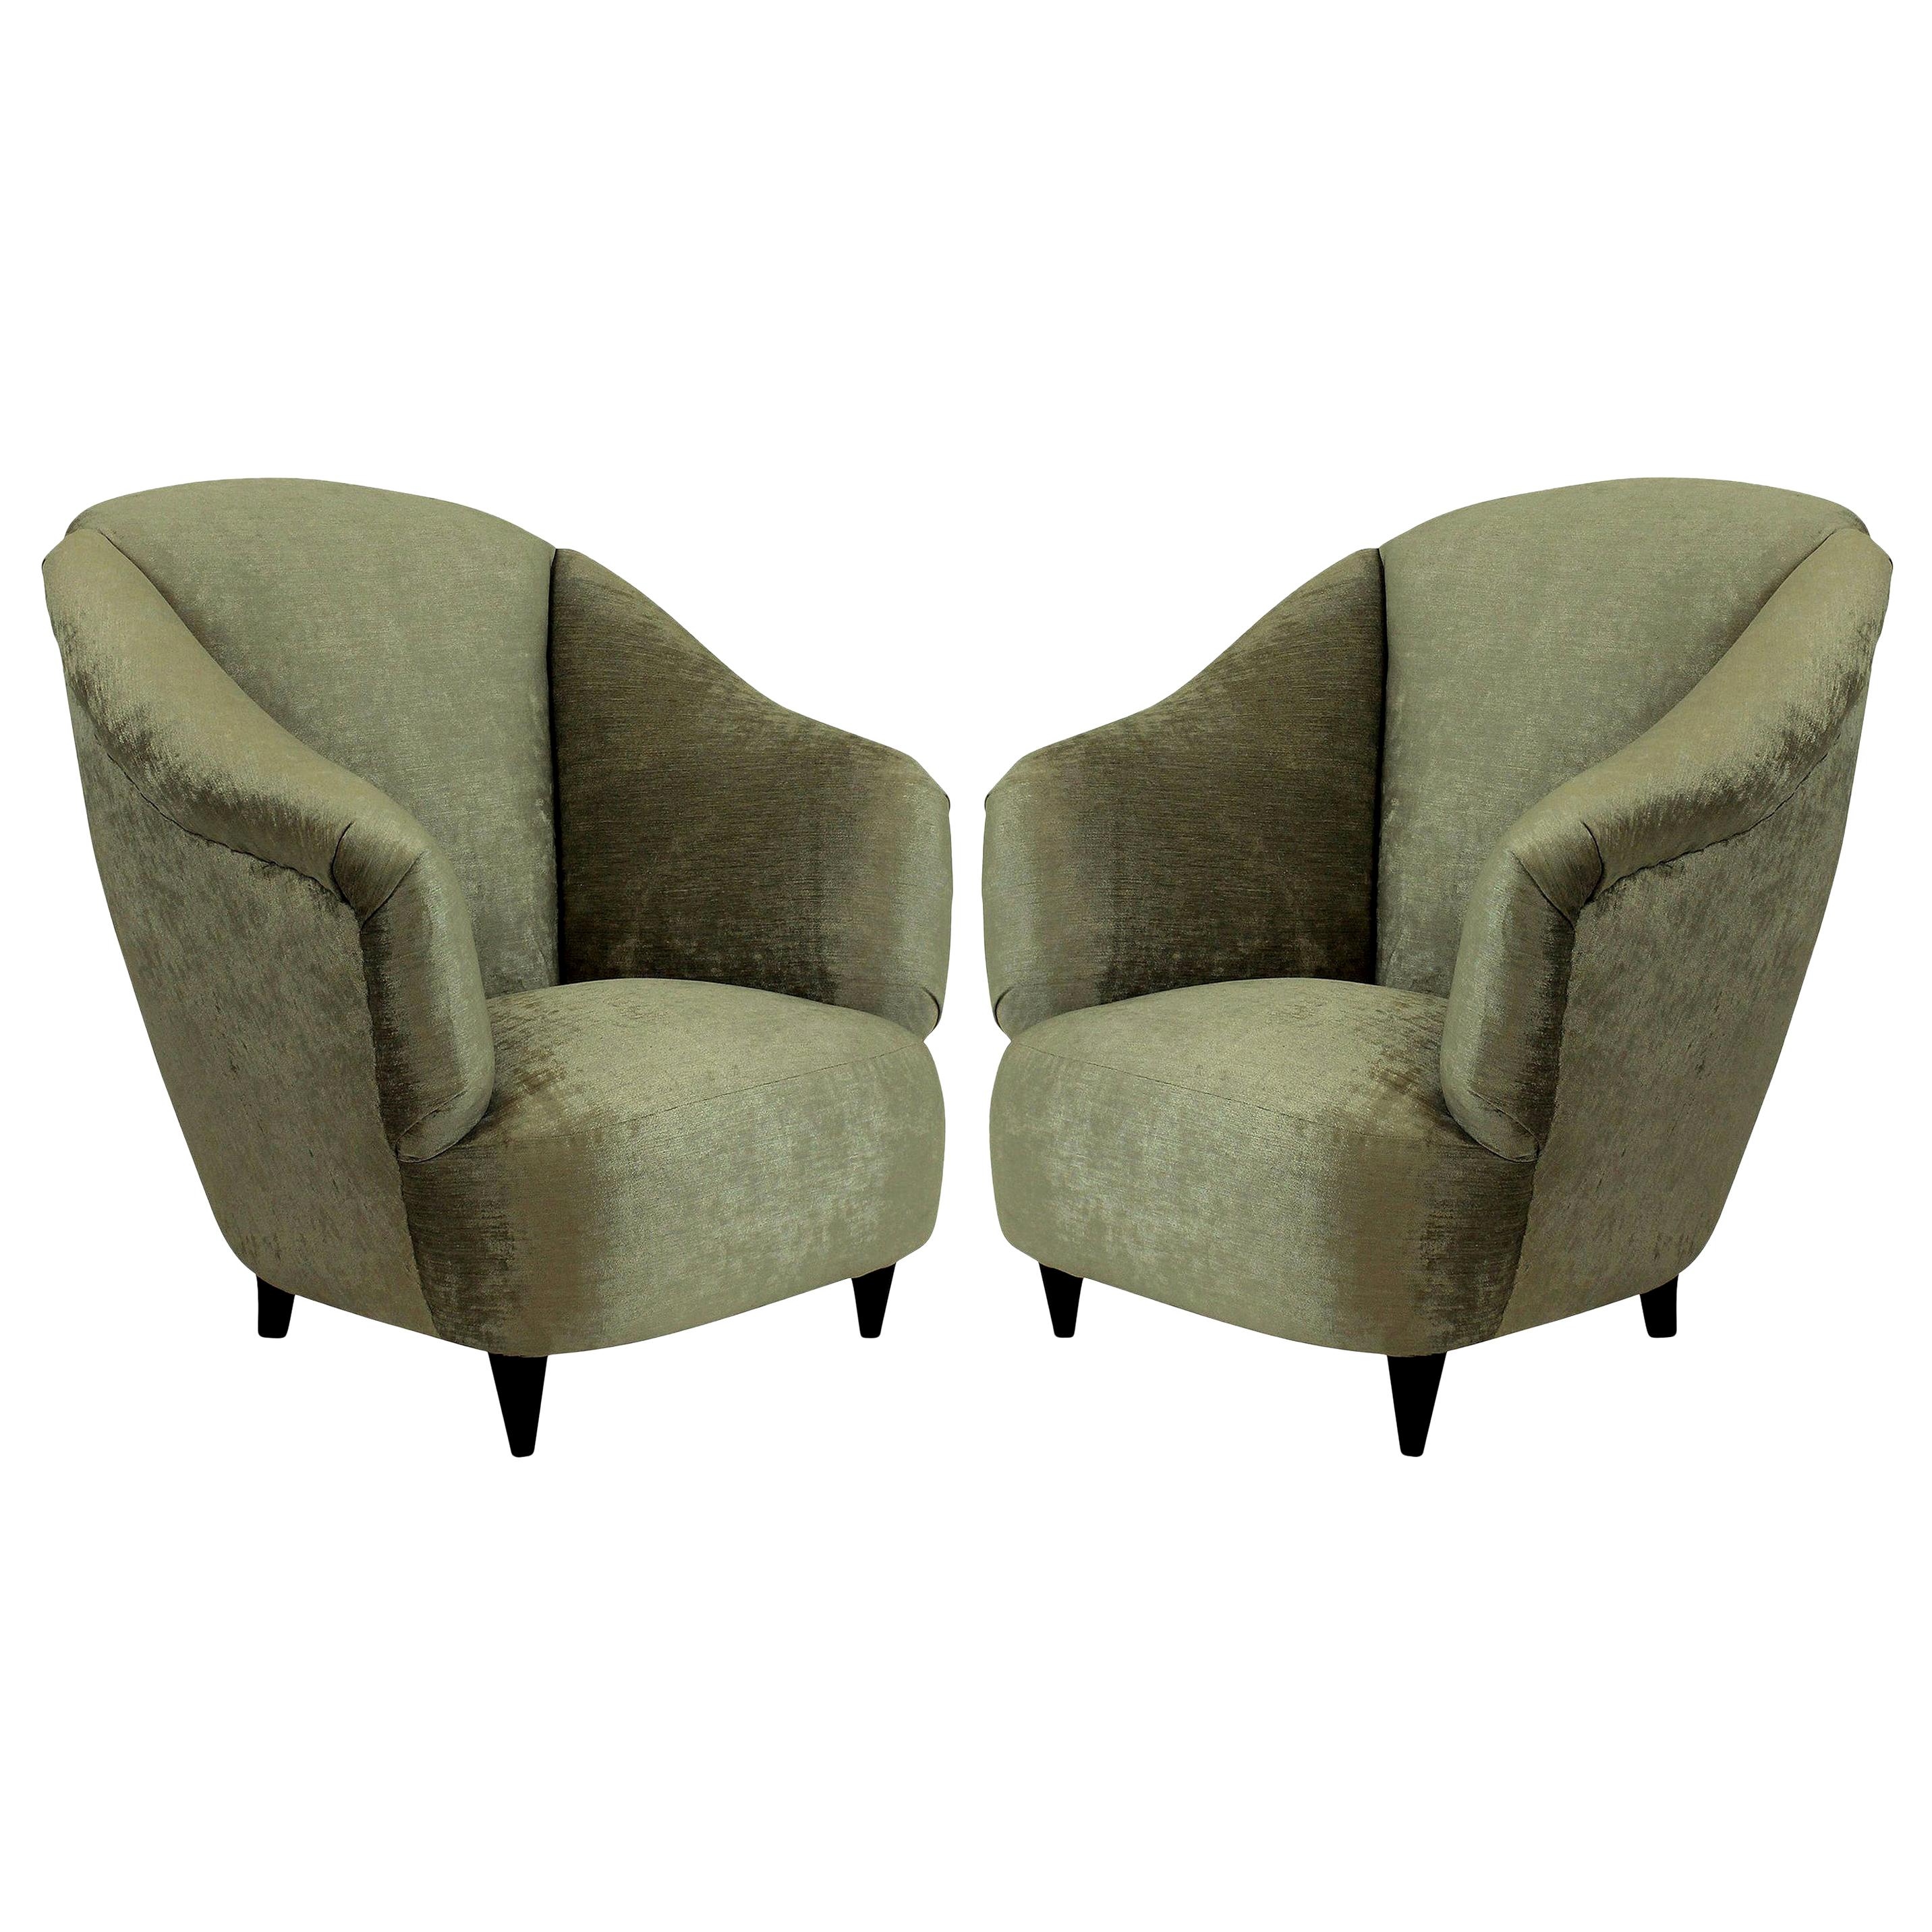 Pair of Midcentury Armchairs by Ulrich